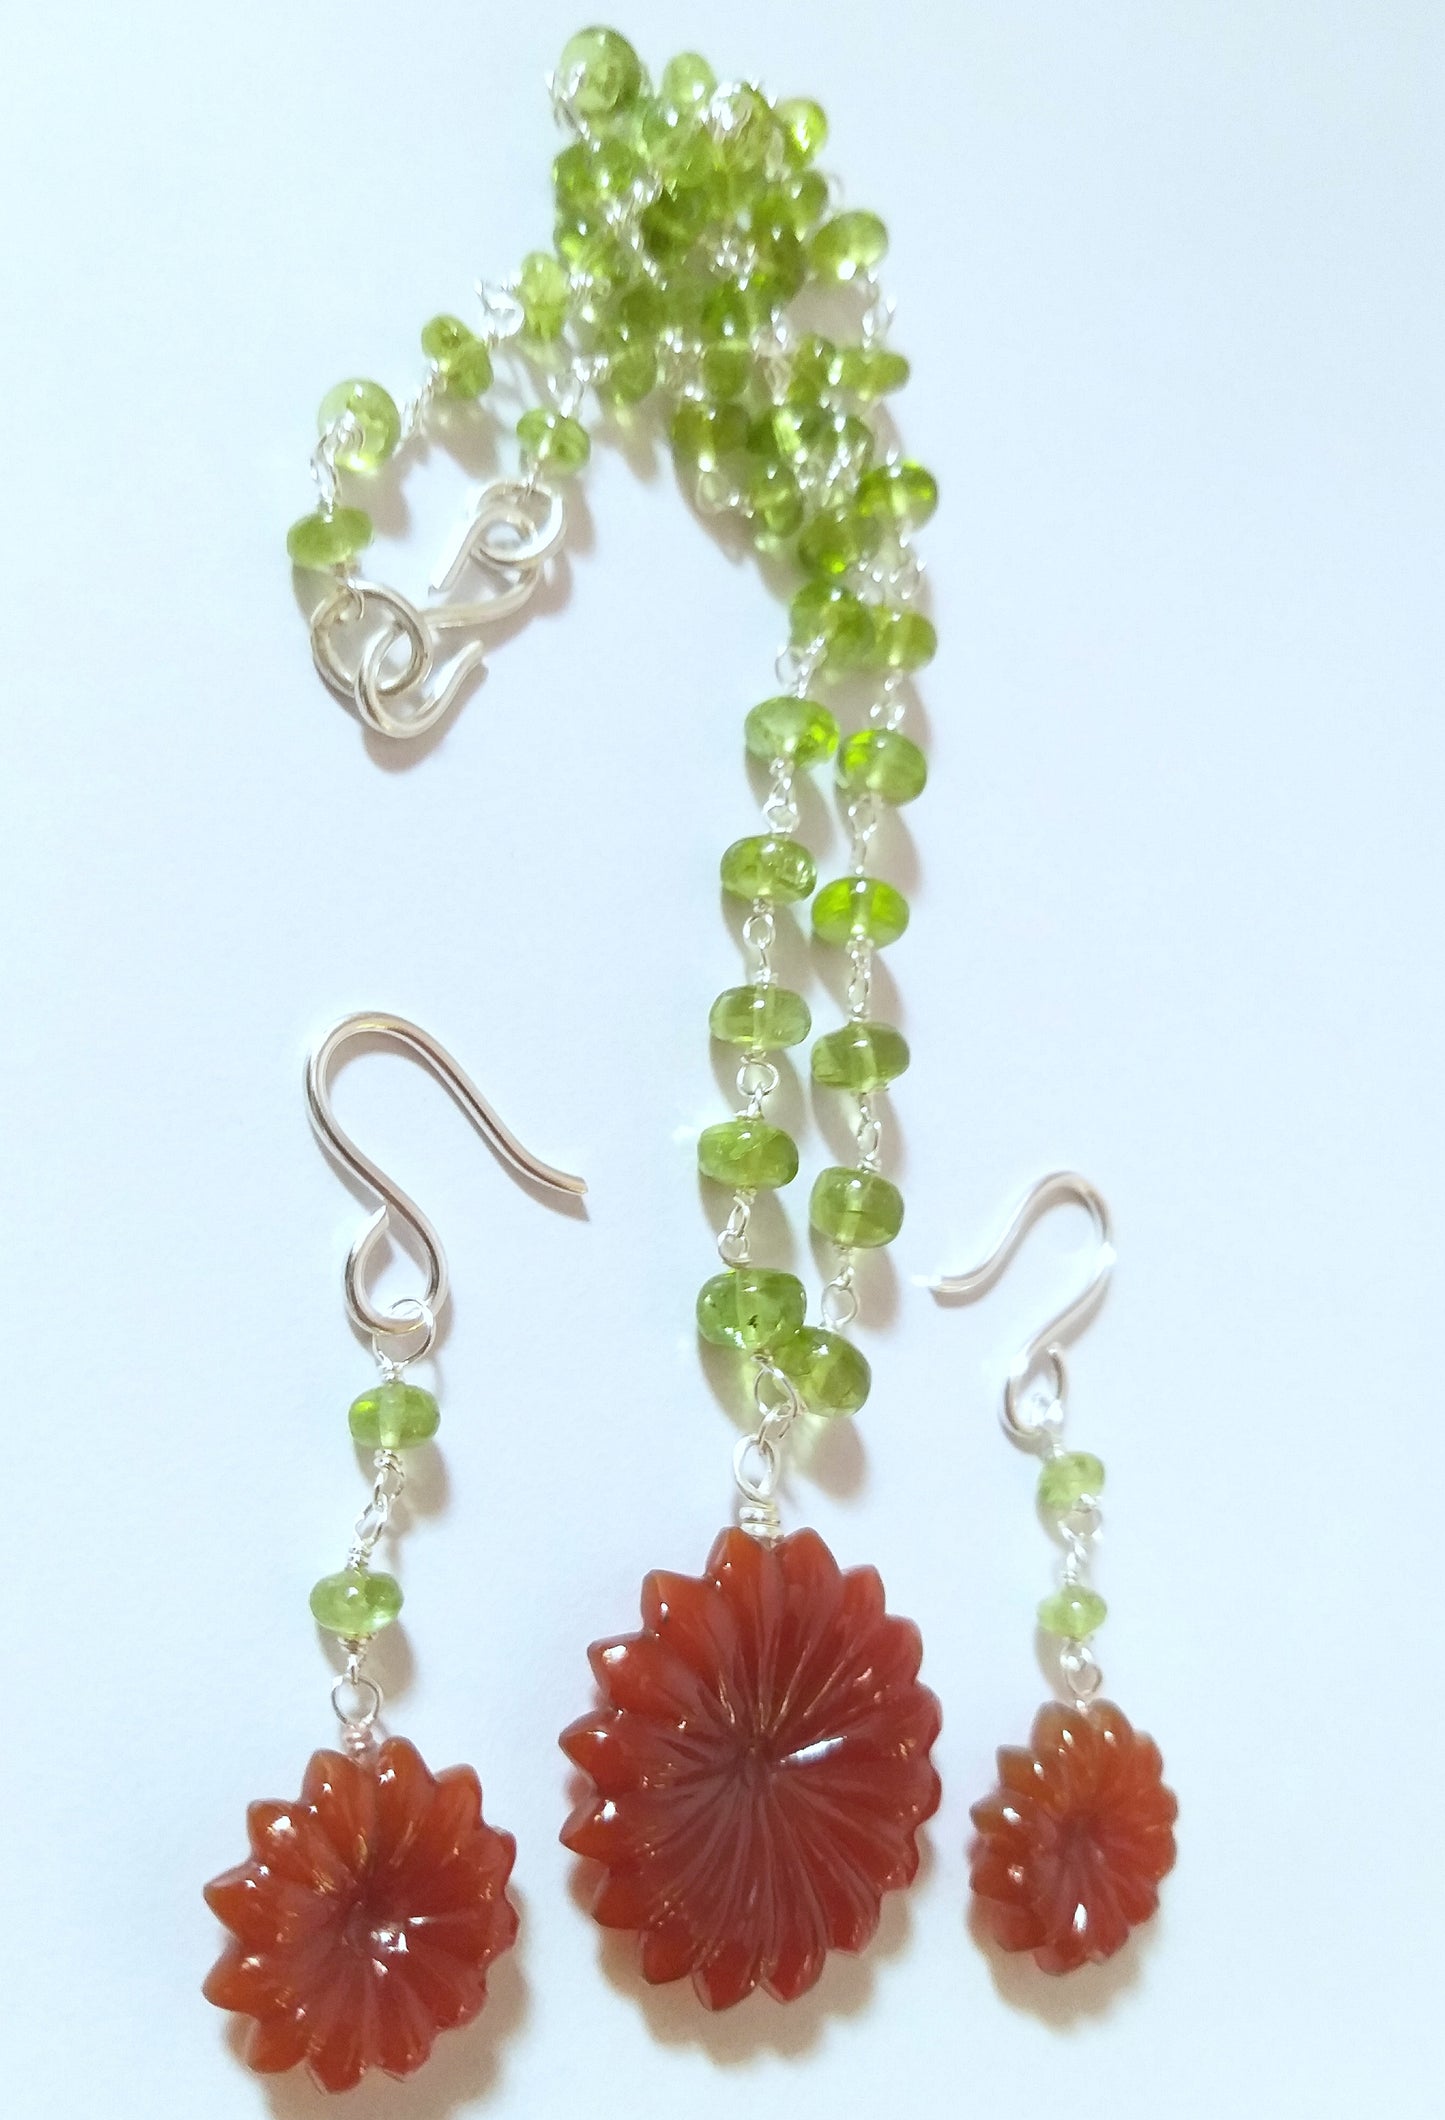 Natural Hand Carved Onyx and Peridot Beads Necklace, August Birthstone Jewelry